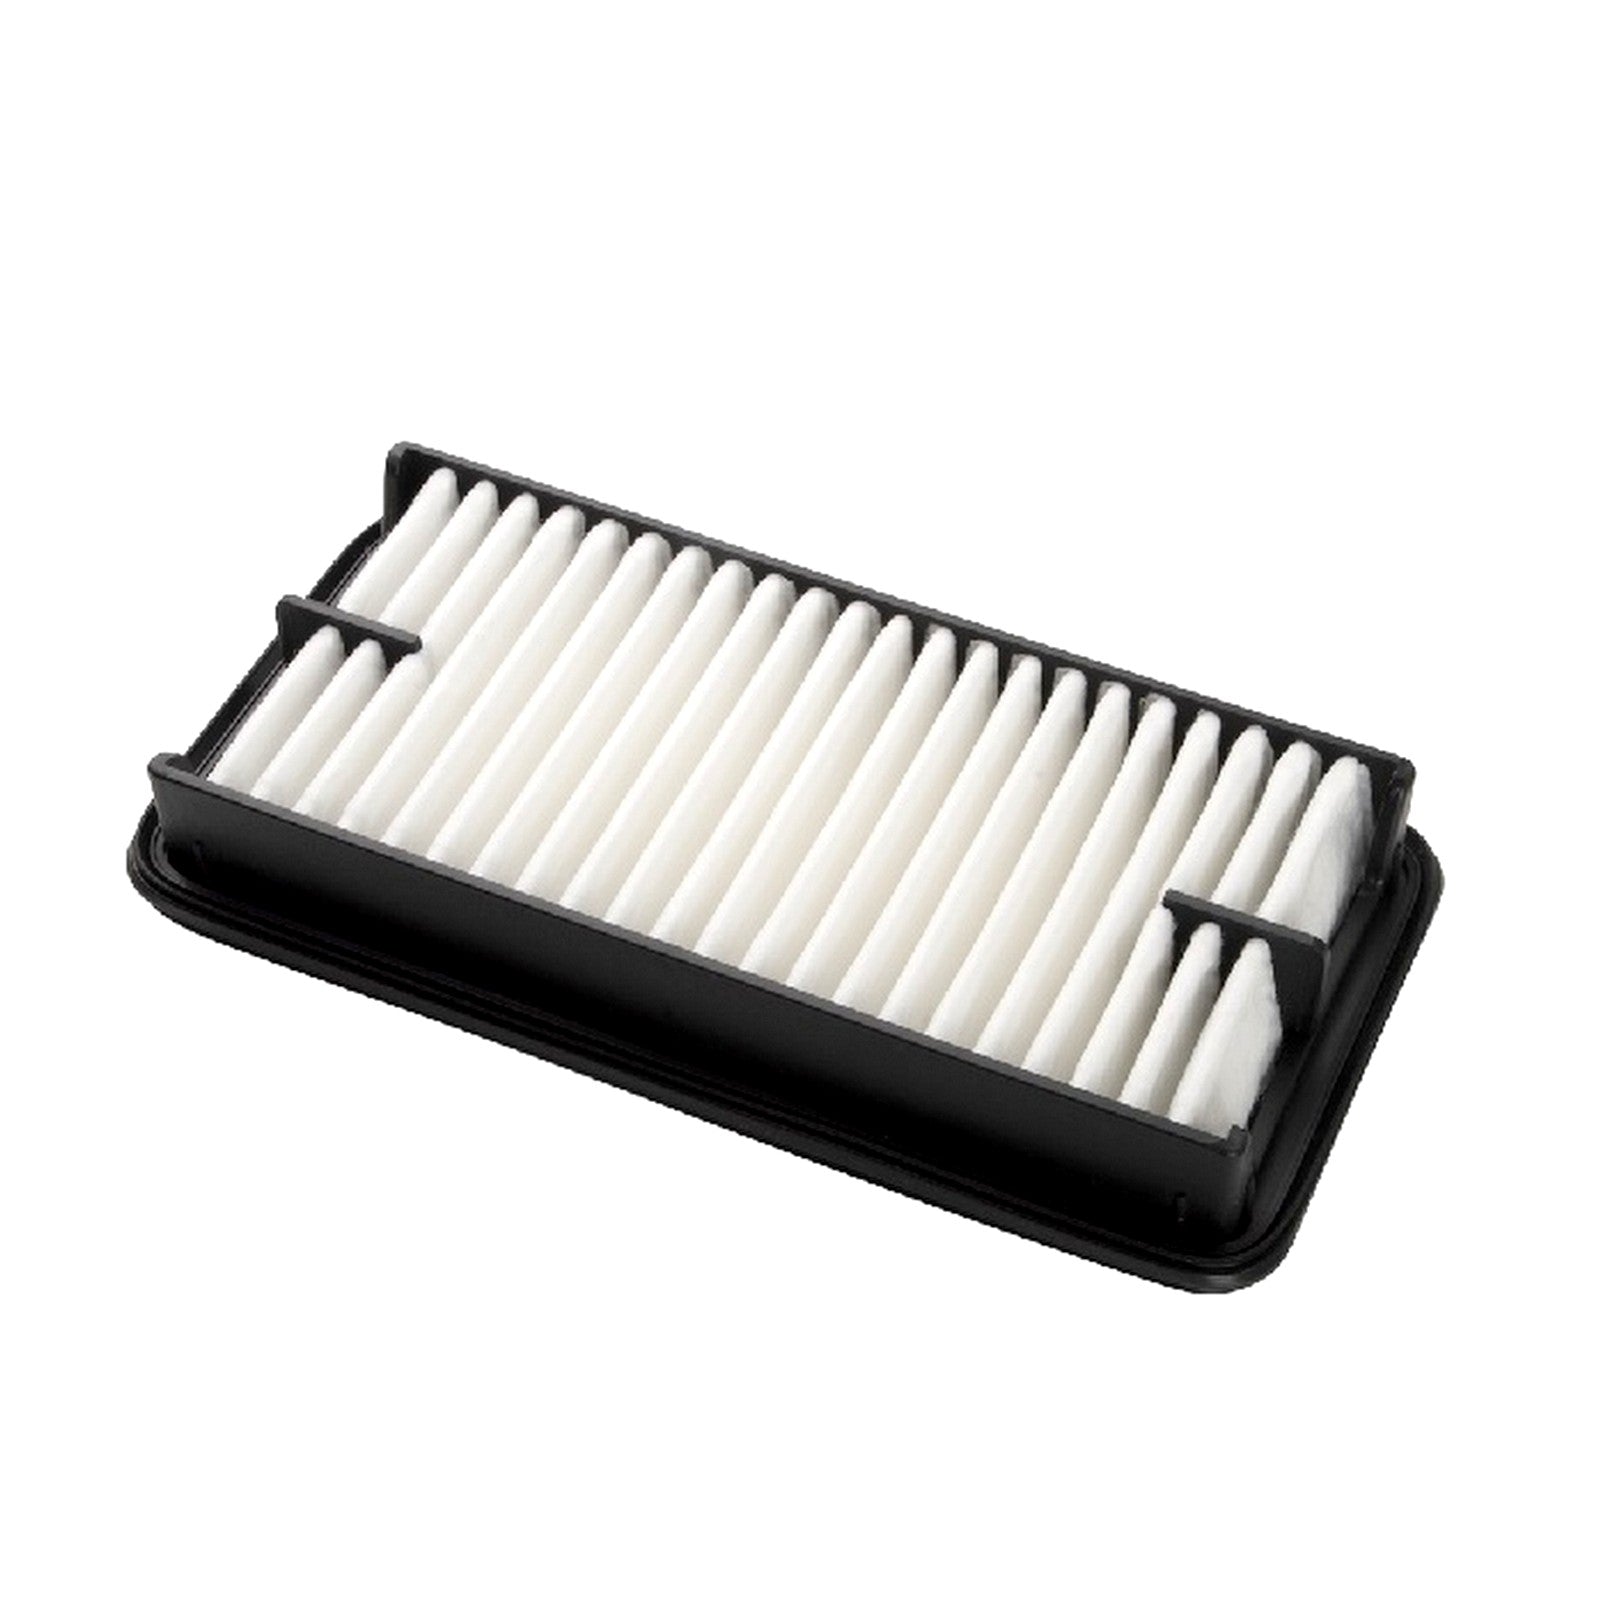 AIR FILTER ELEMENT FOR NISSAN DAYZ & eK WAGON (IMPORTED)